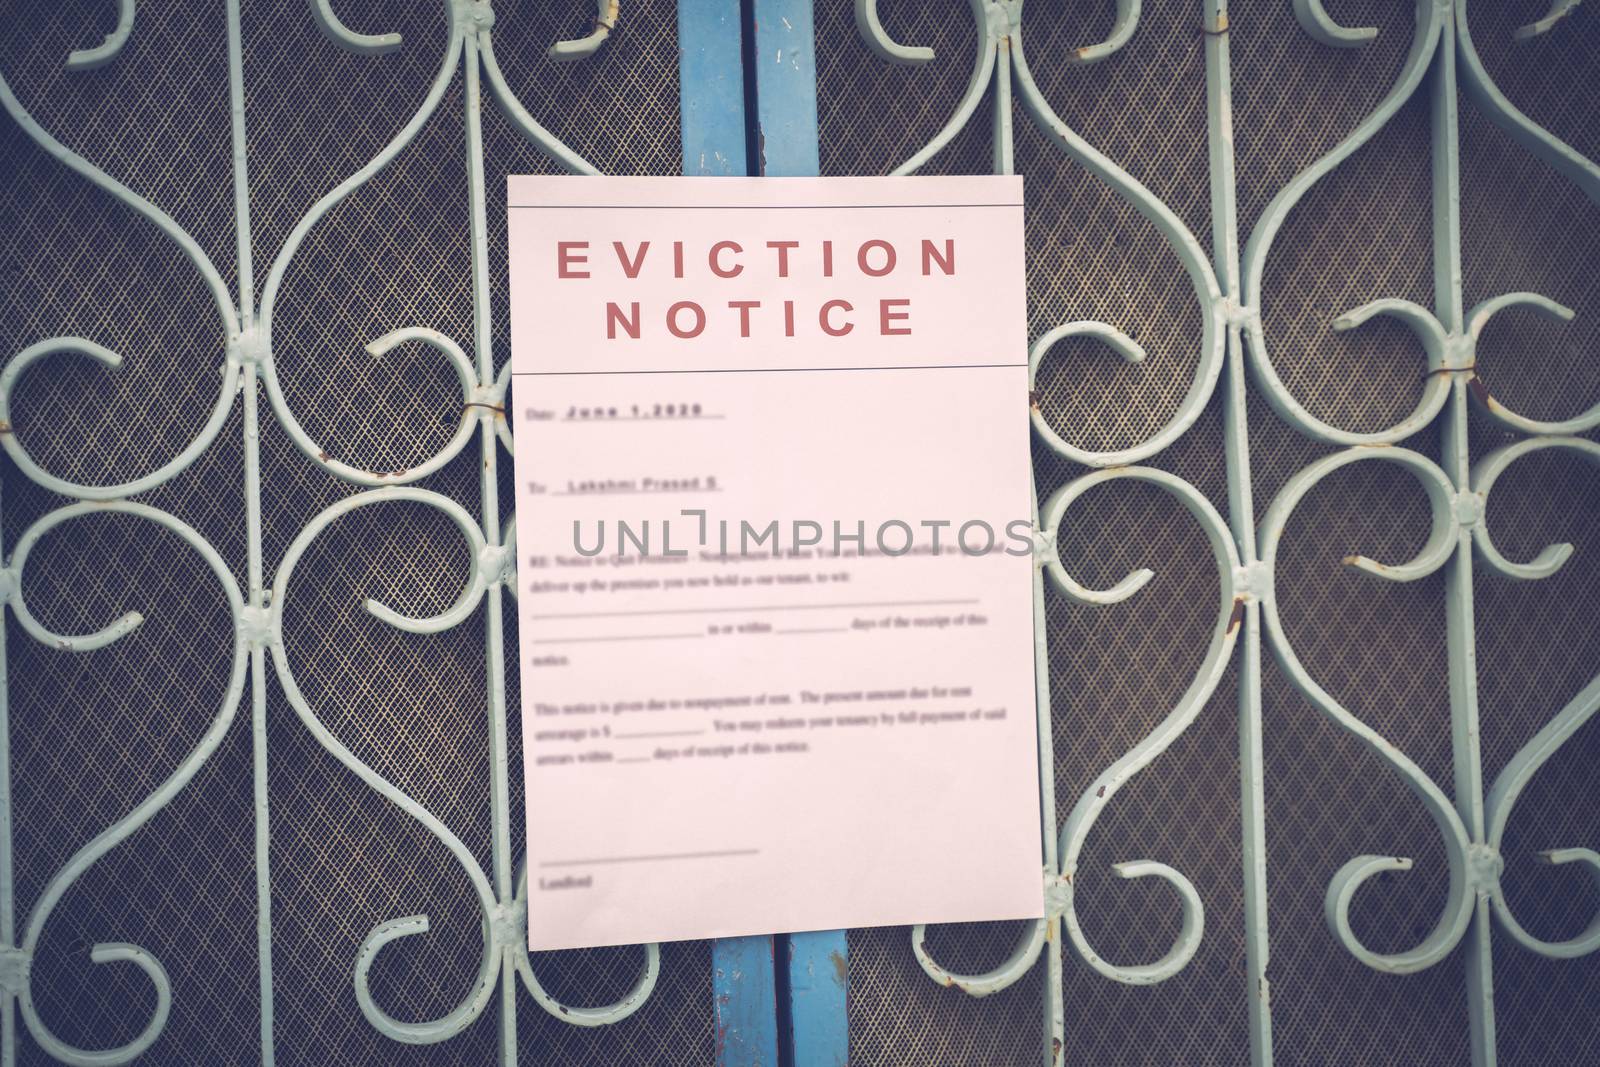 Foreclosed or eviciton notice on a main door with blurred details of a house with vintage filter. by lakshmiprasad.maski@gmai.com